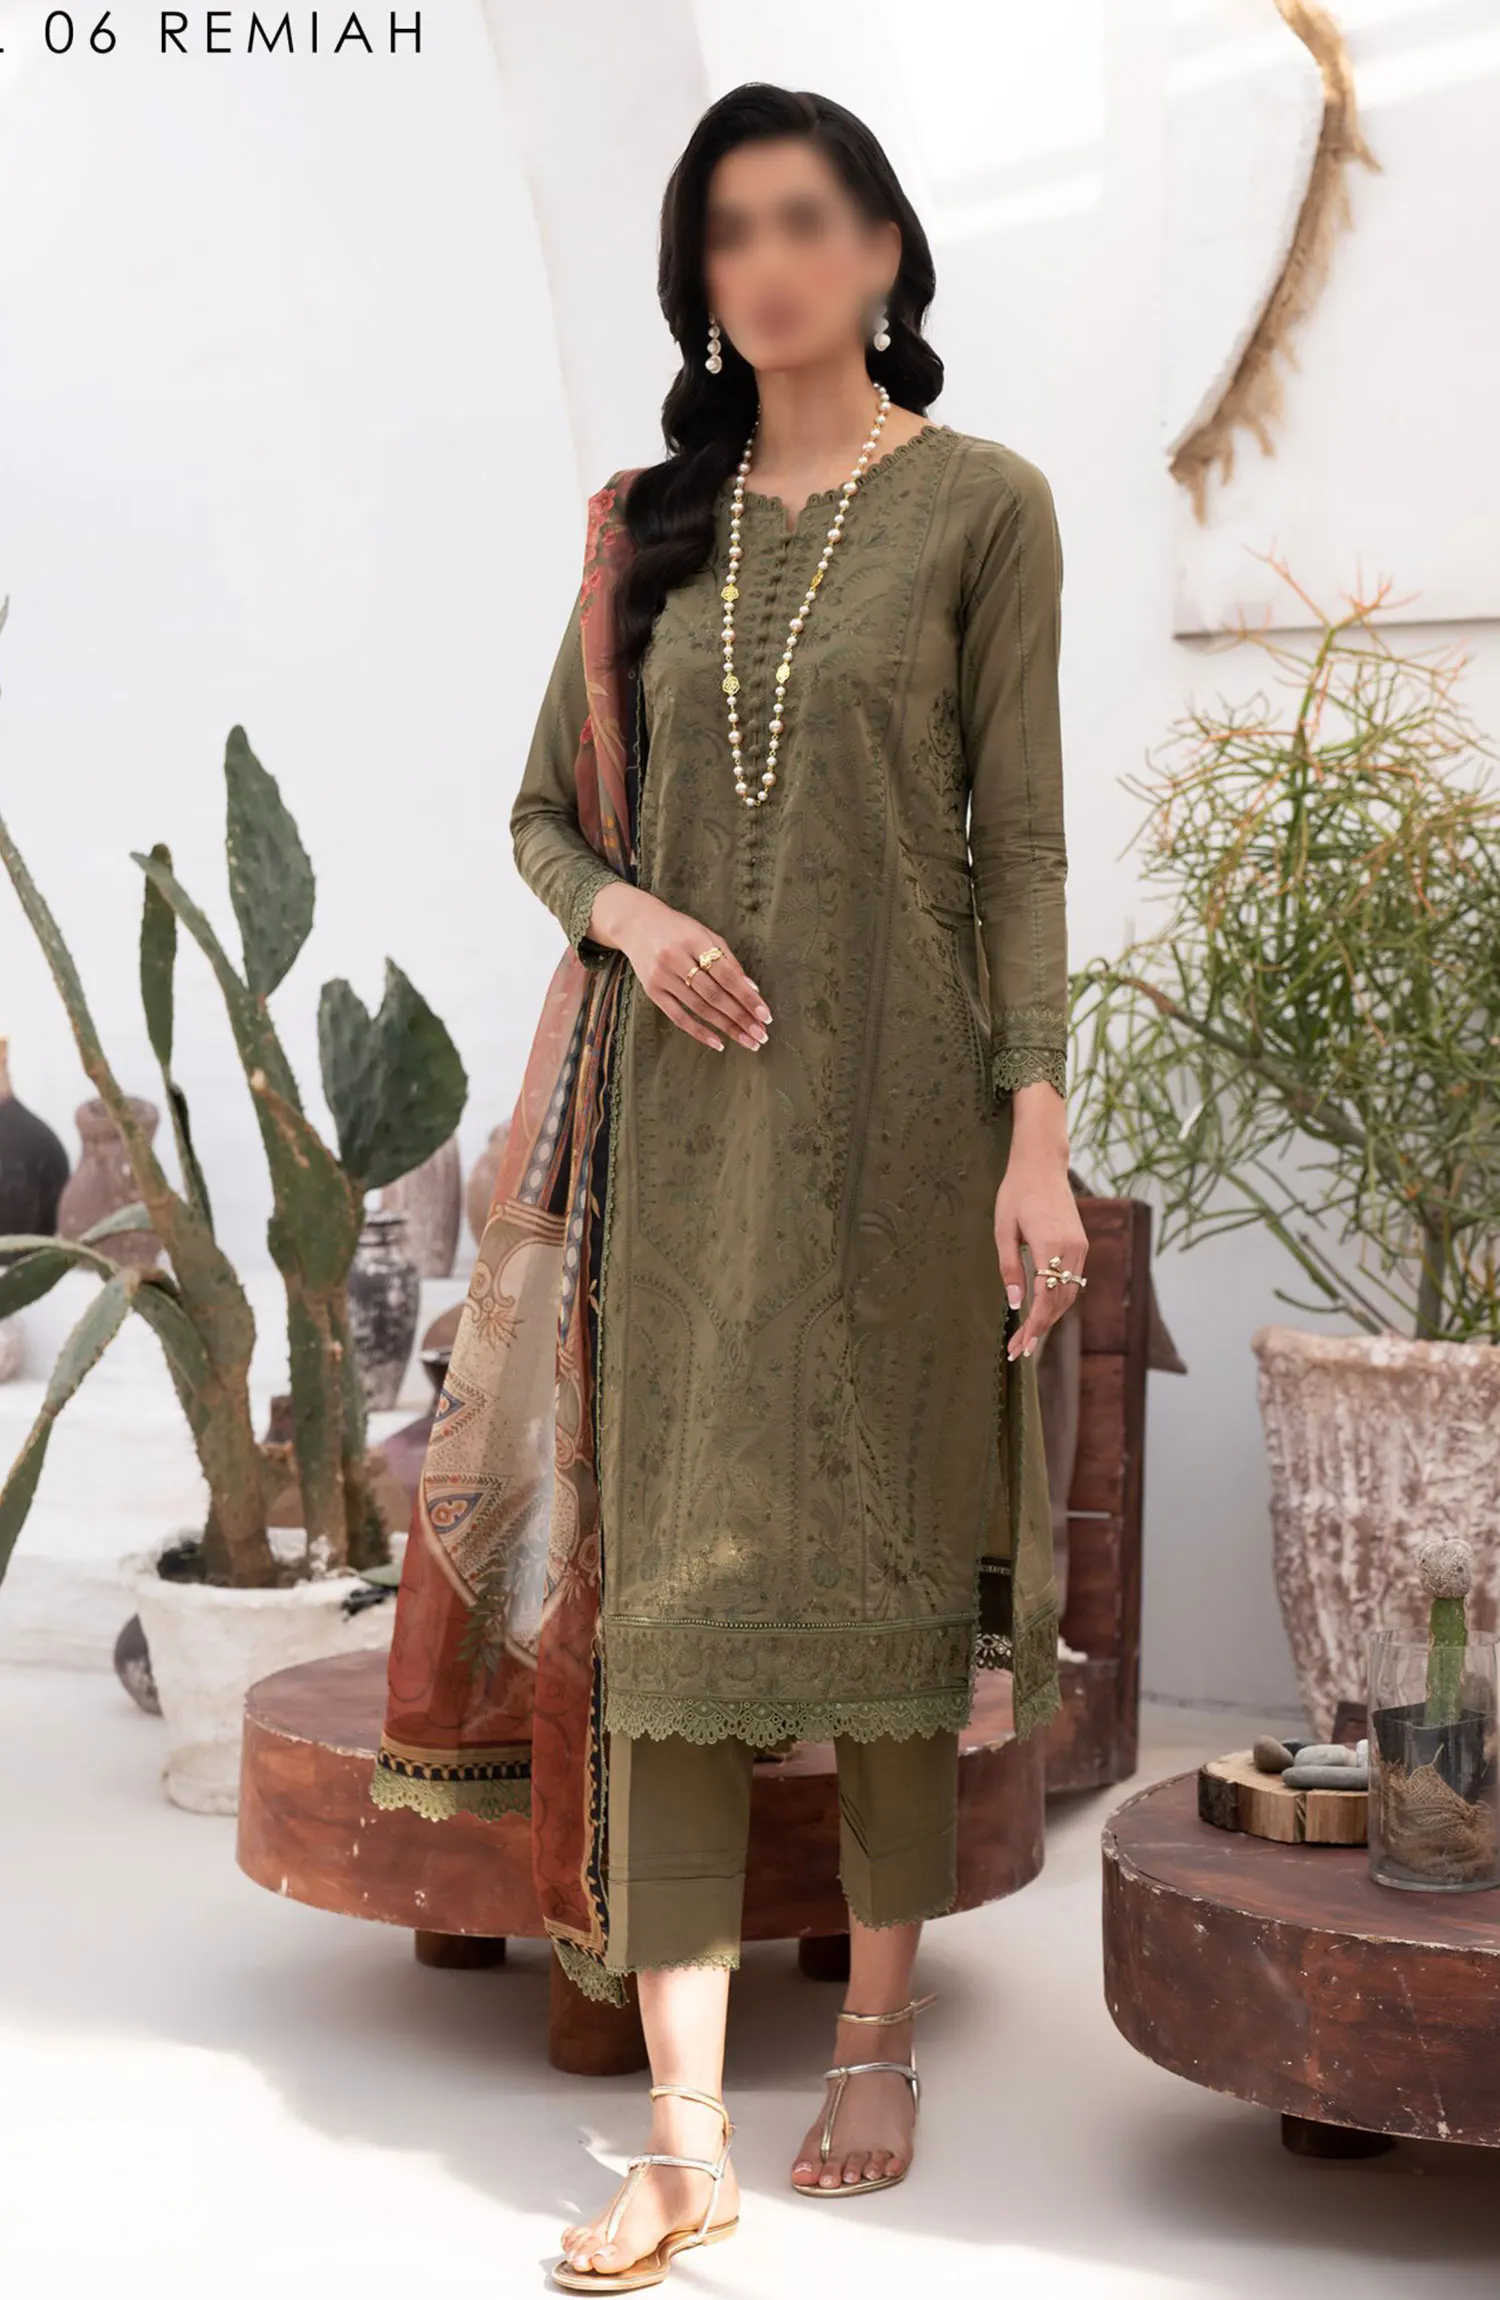 Zarif Eid Lawn Embroidered and Printed Edit - ZL 06 REMIAH